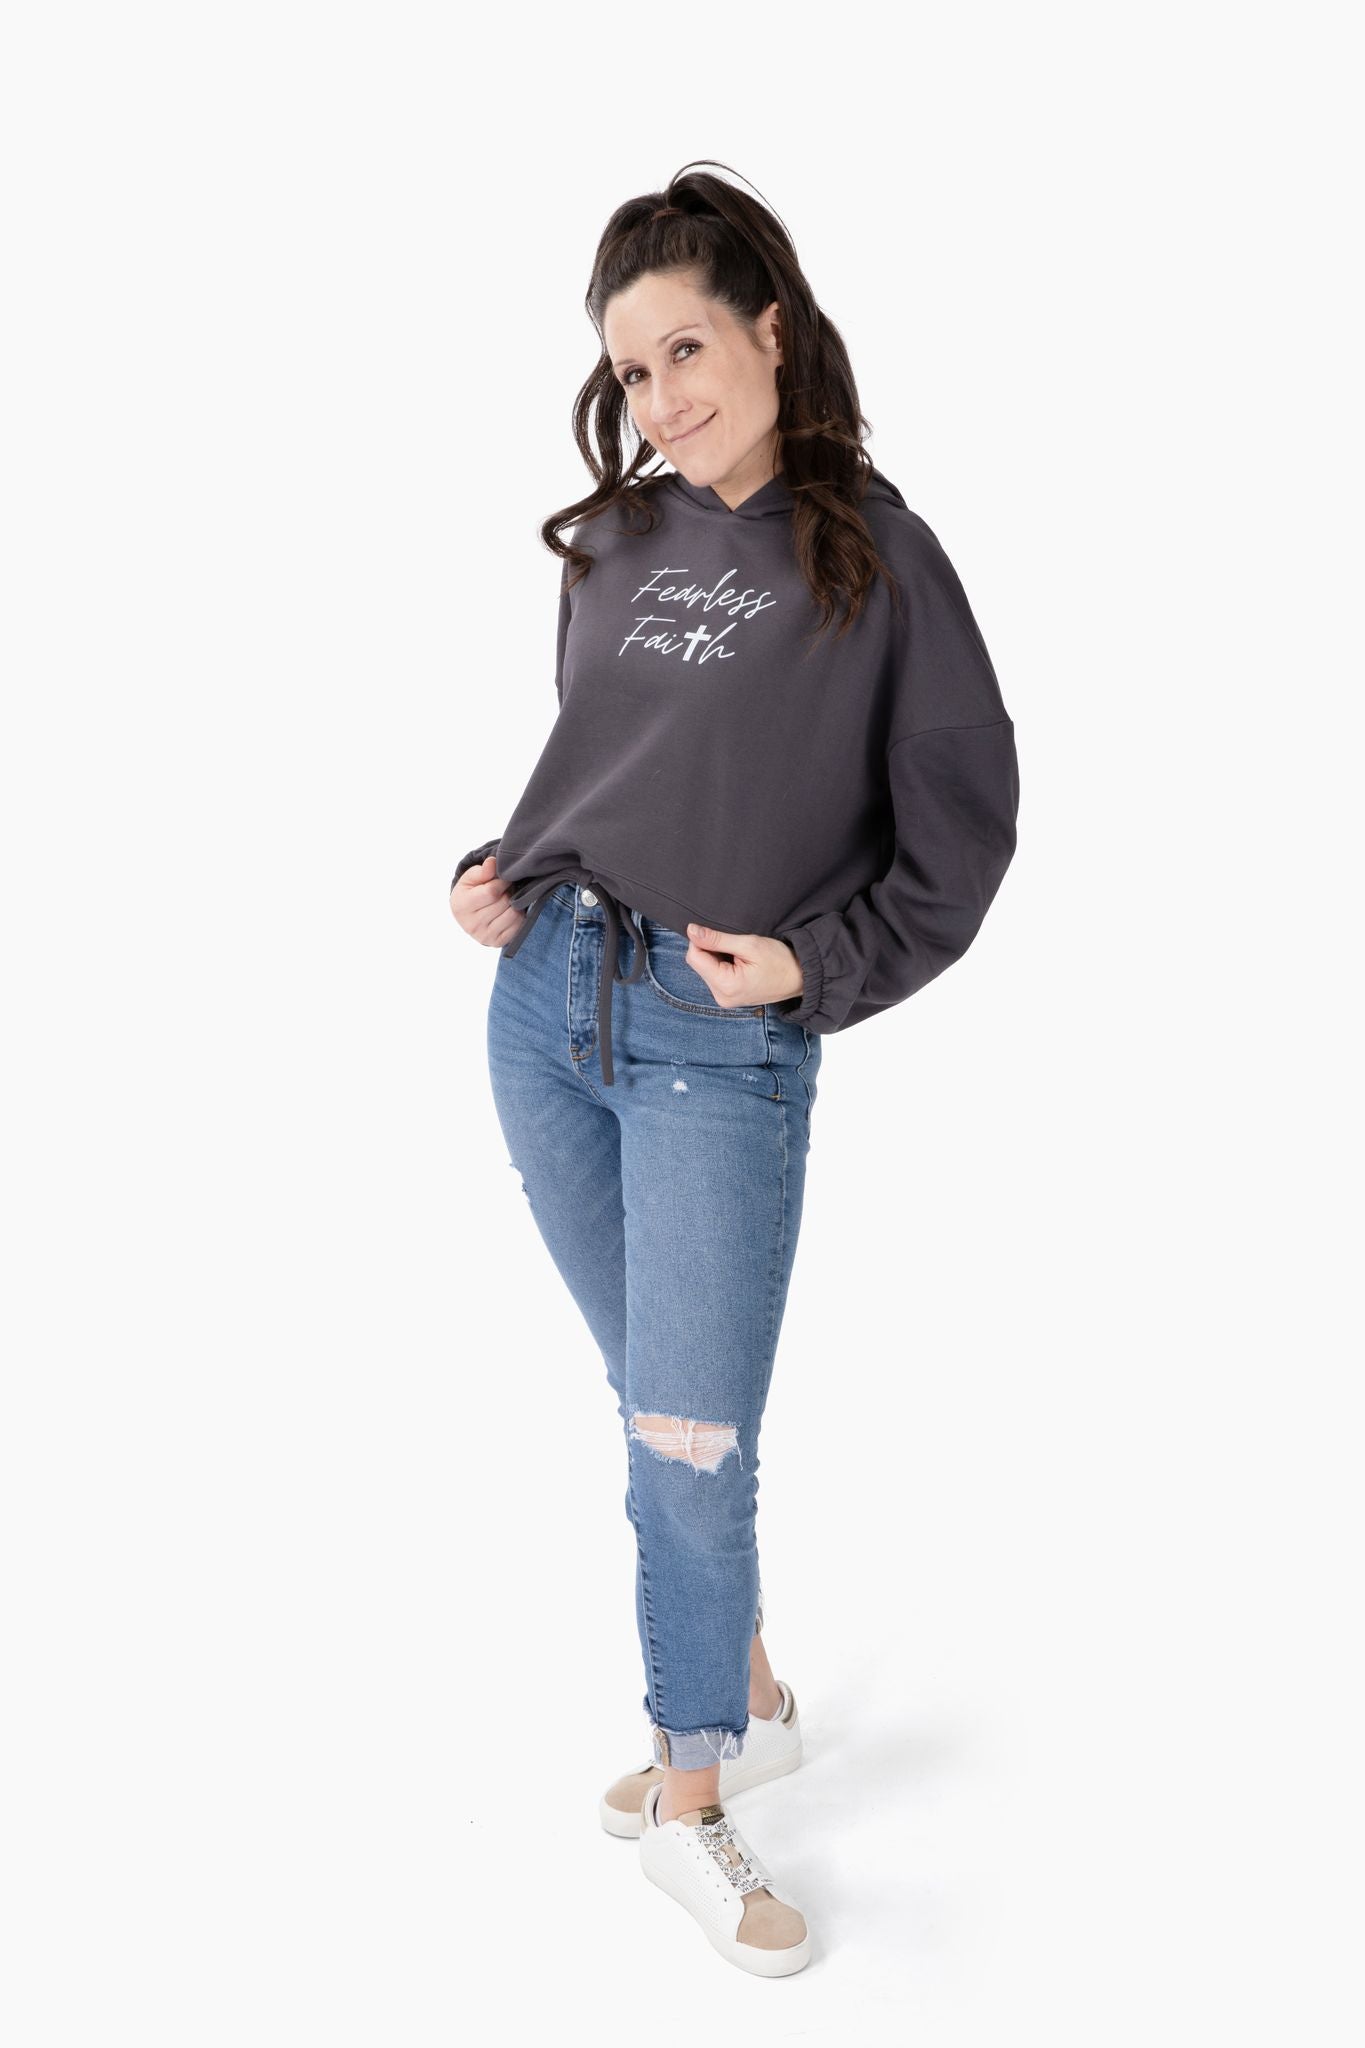 Fearless Faith Ladies' Cropped Oversize Hooded Sweatshirt